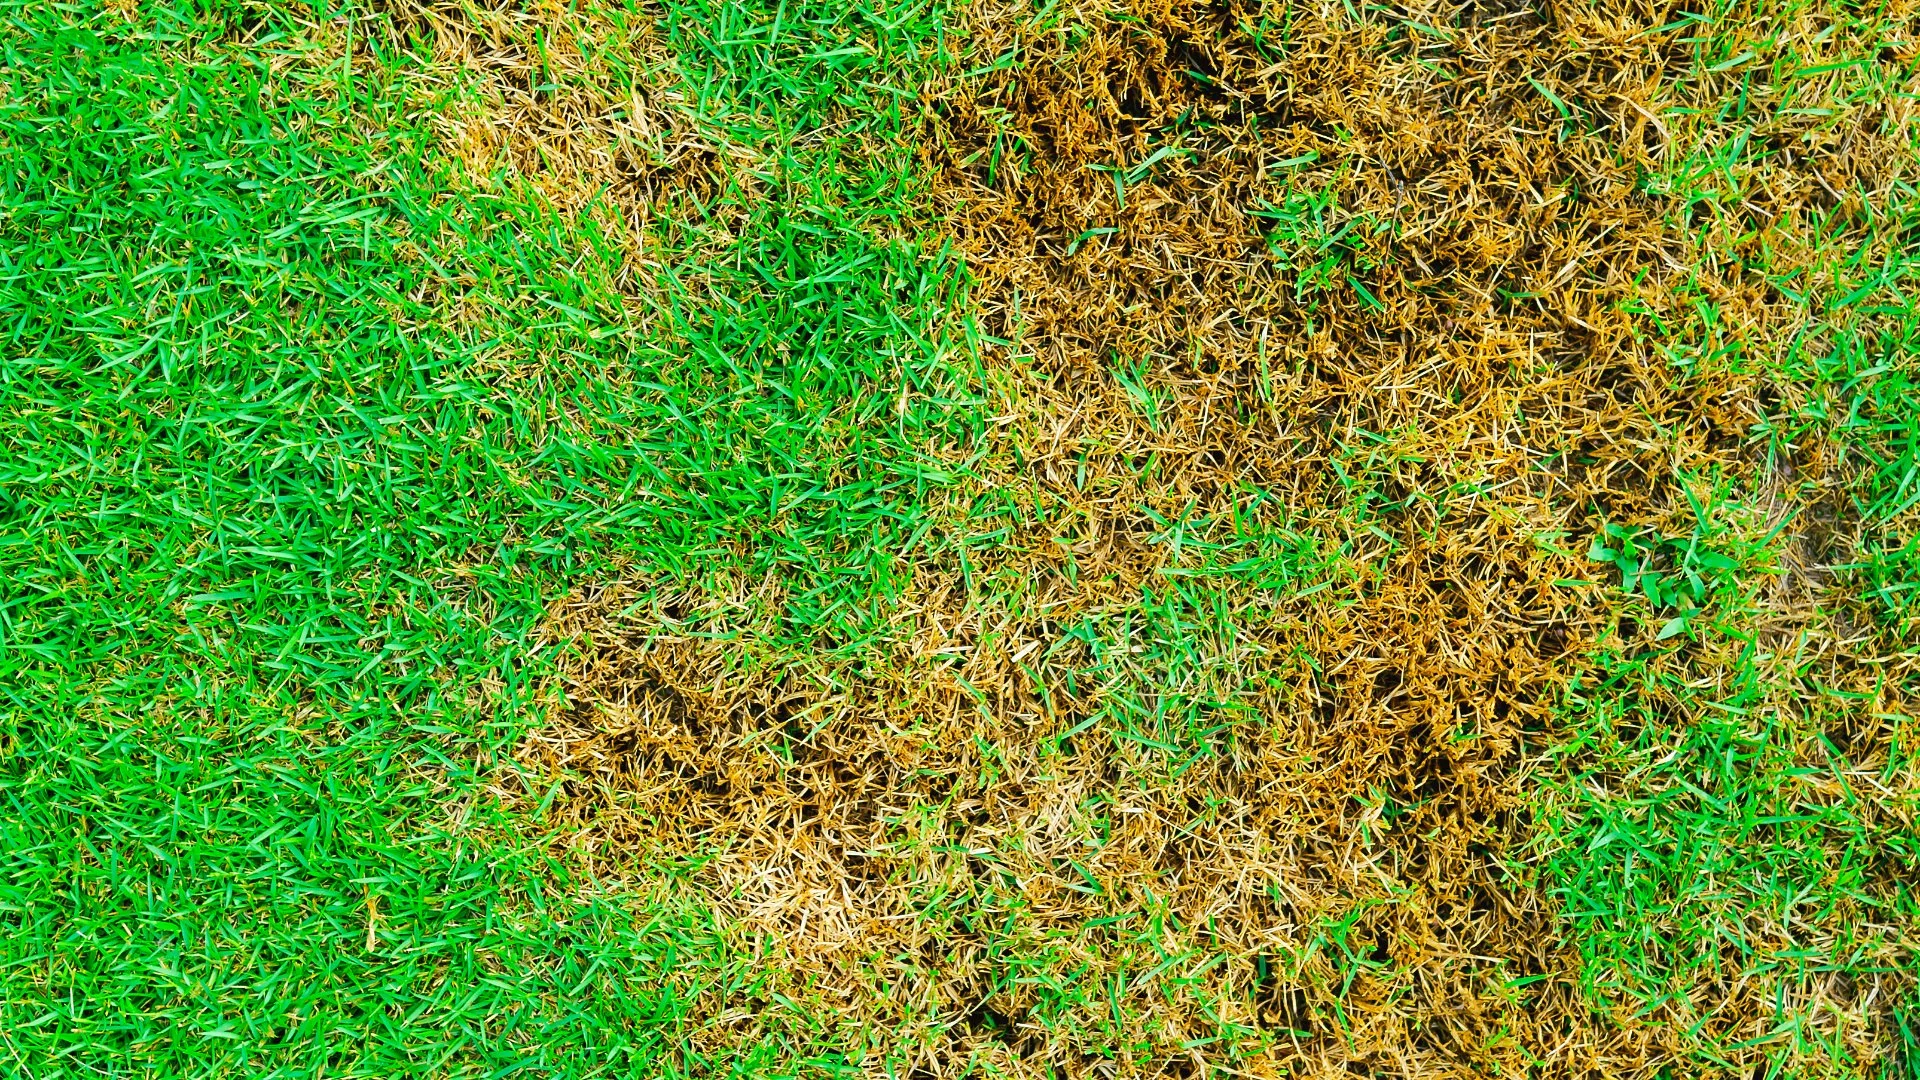 4 Lawn Diseases That Can Affect Lawns in Pennsylvania